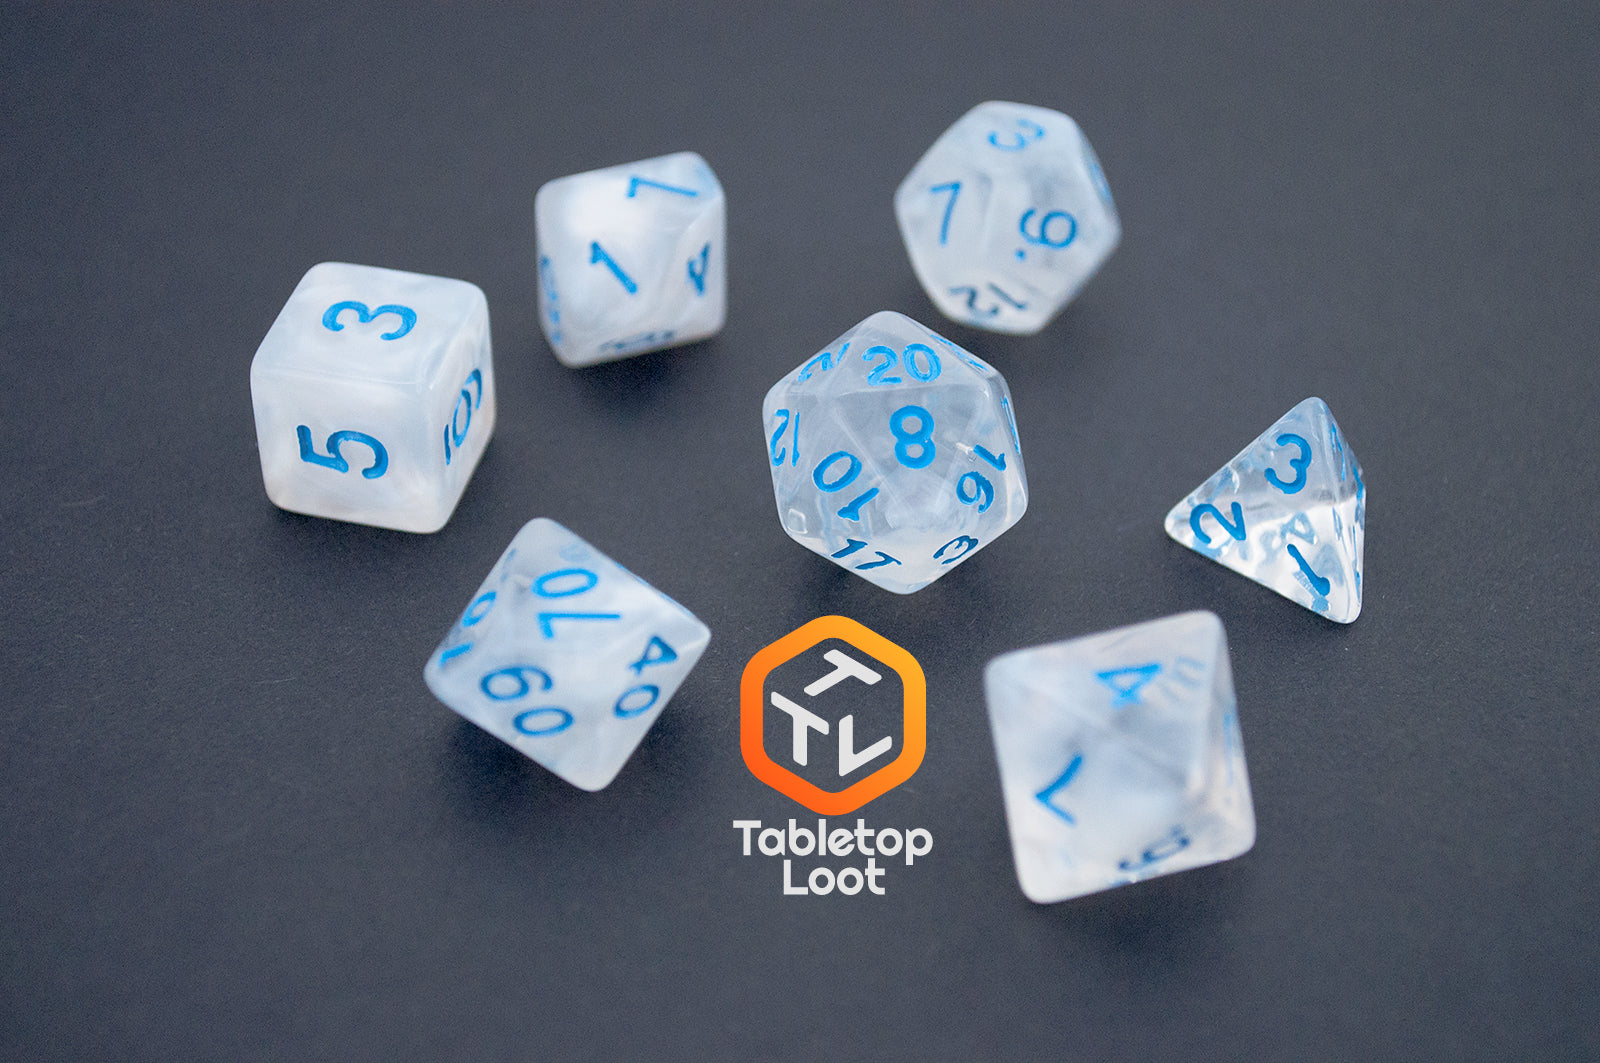 The Dinneshere 7 piece dice set from Tabletop Loot with wispy white swirls and blue numbering.